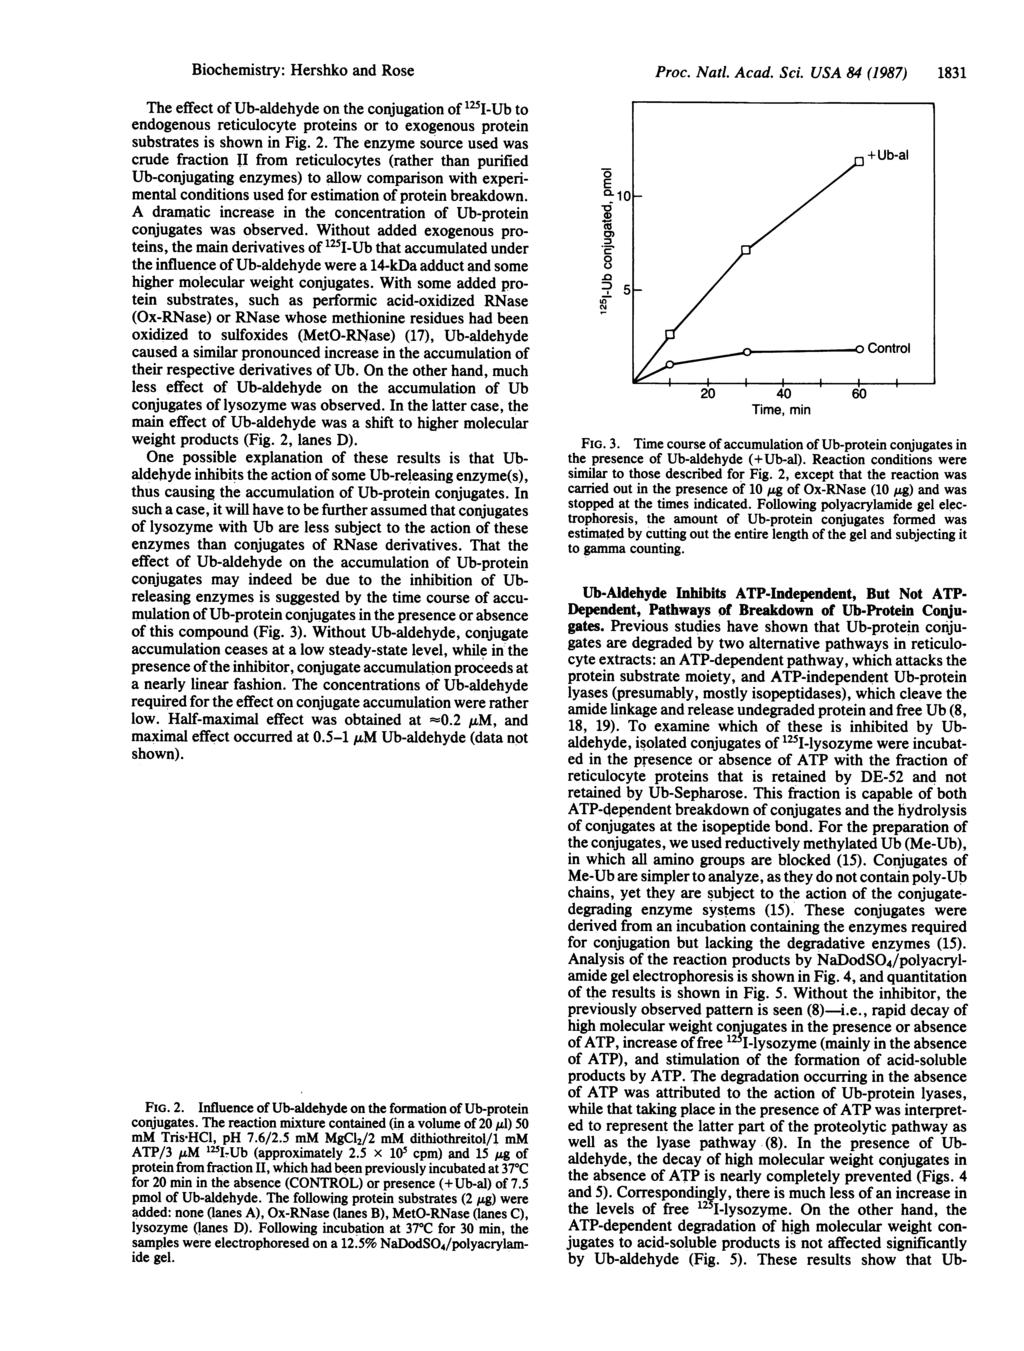 Biochemistry: Hershko and Rose The effect of Ub-aldehyde on the conjugation of 1251I-Ub to endogenous reticulocyte proteins or to exogenous protein substrates is shown in Fig. 2.